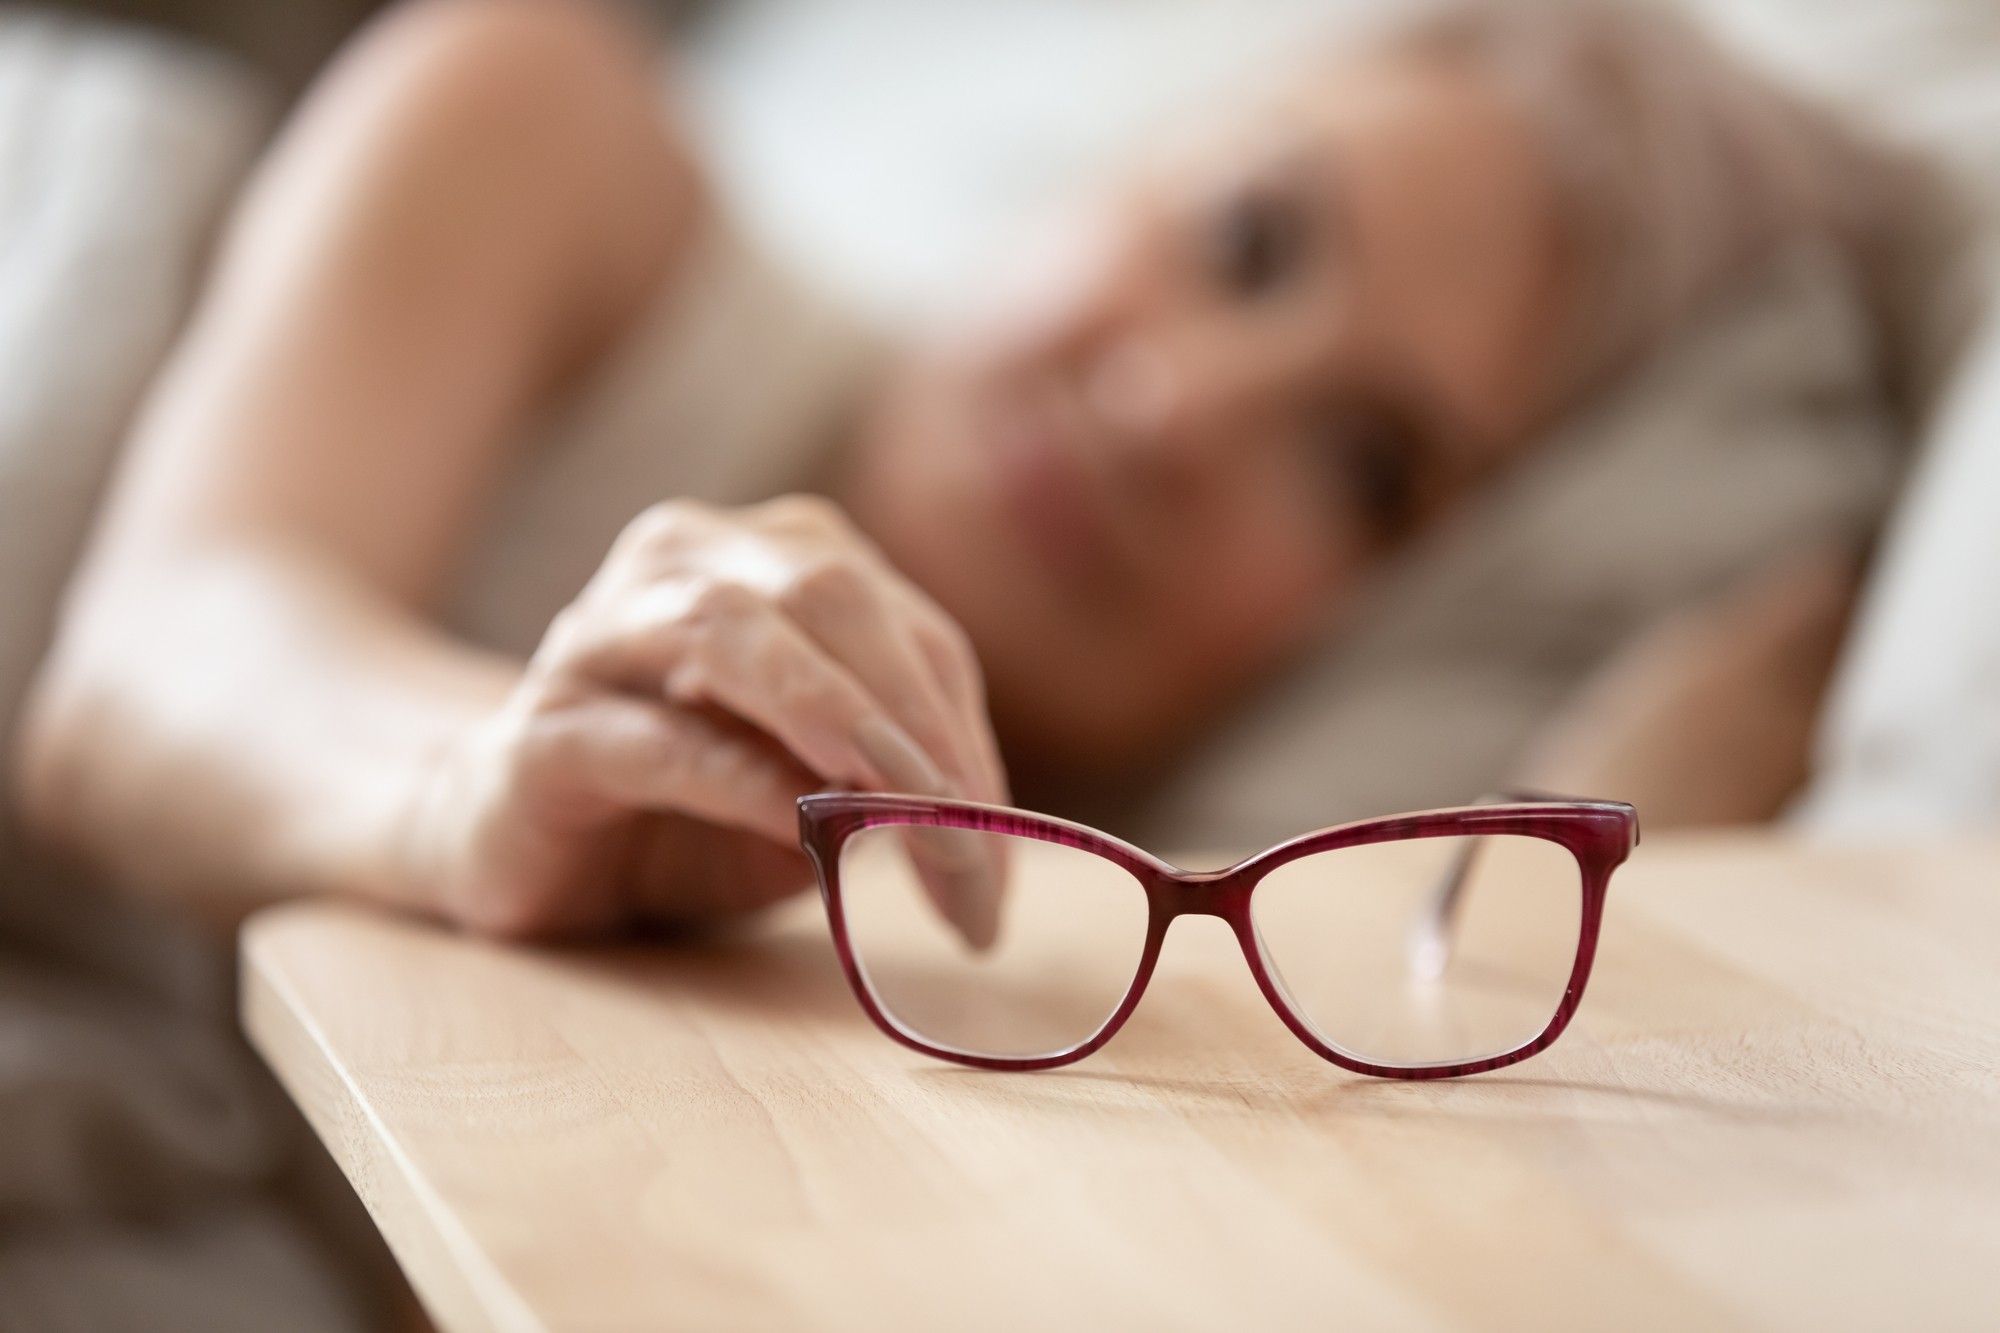 older woman in bed reaching for glasses